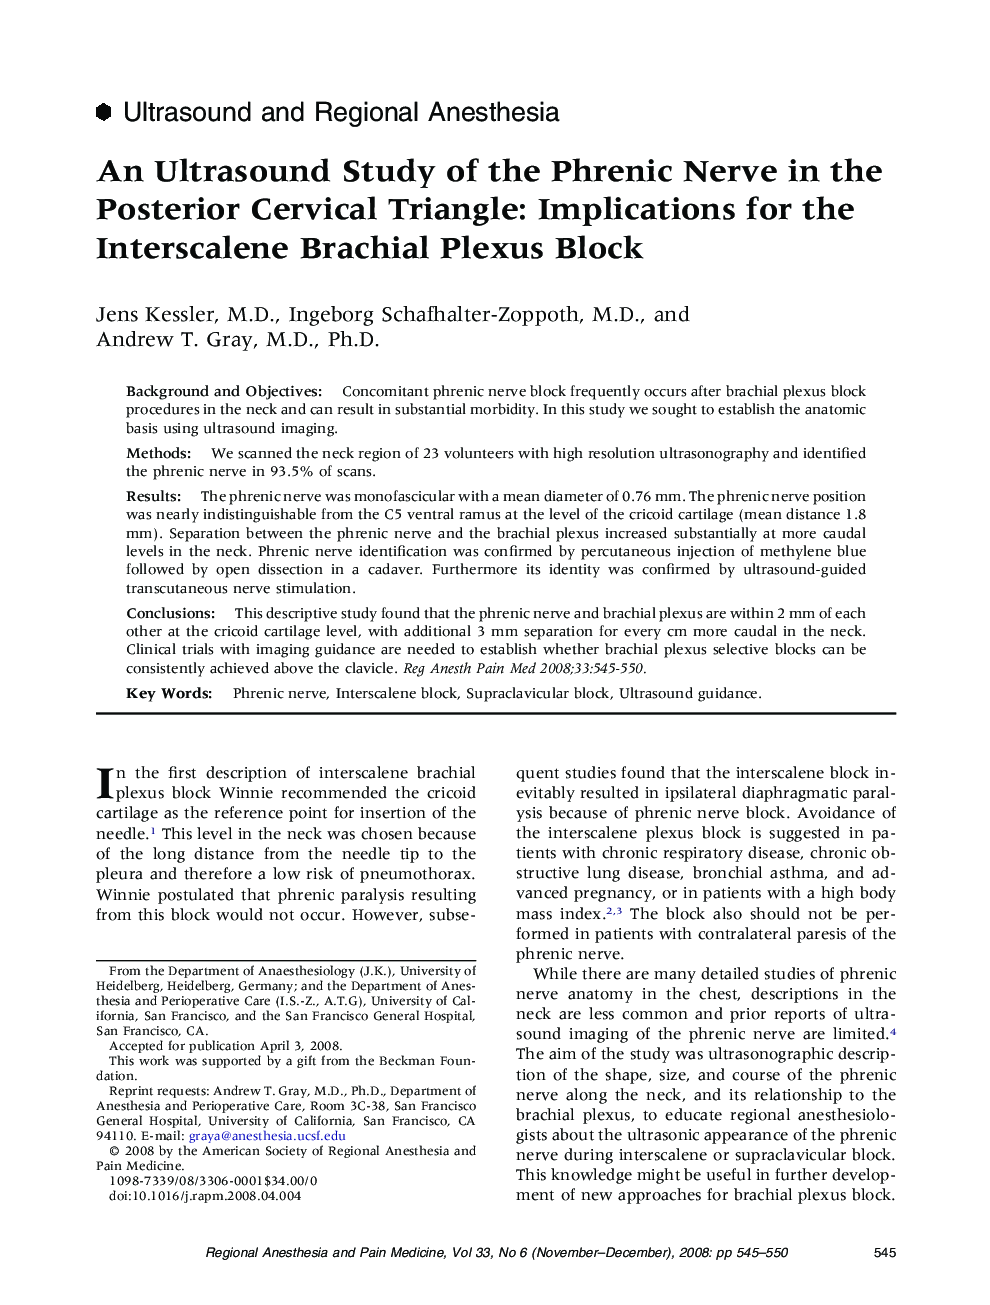 An Ultrasound Study of the Phrenic Nerve in the Posterior Cervical Triangle: Implications for the Interscalene Brachial Plexus Block